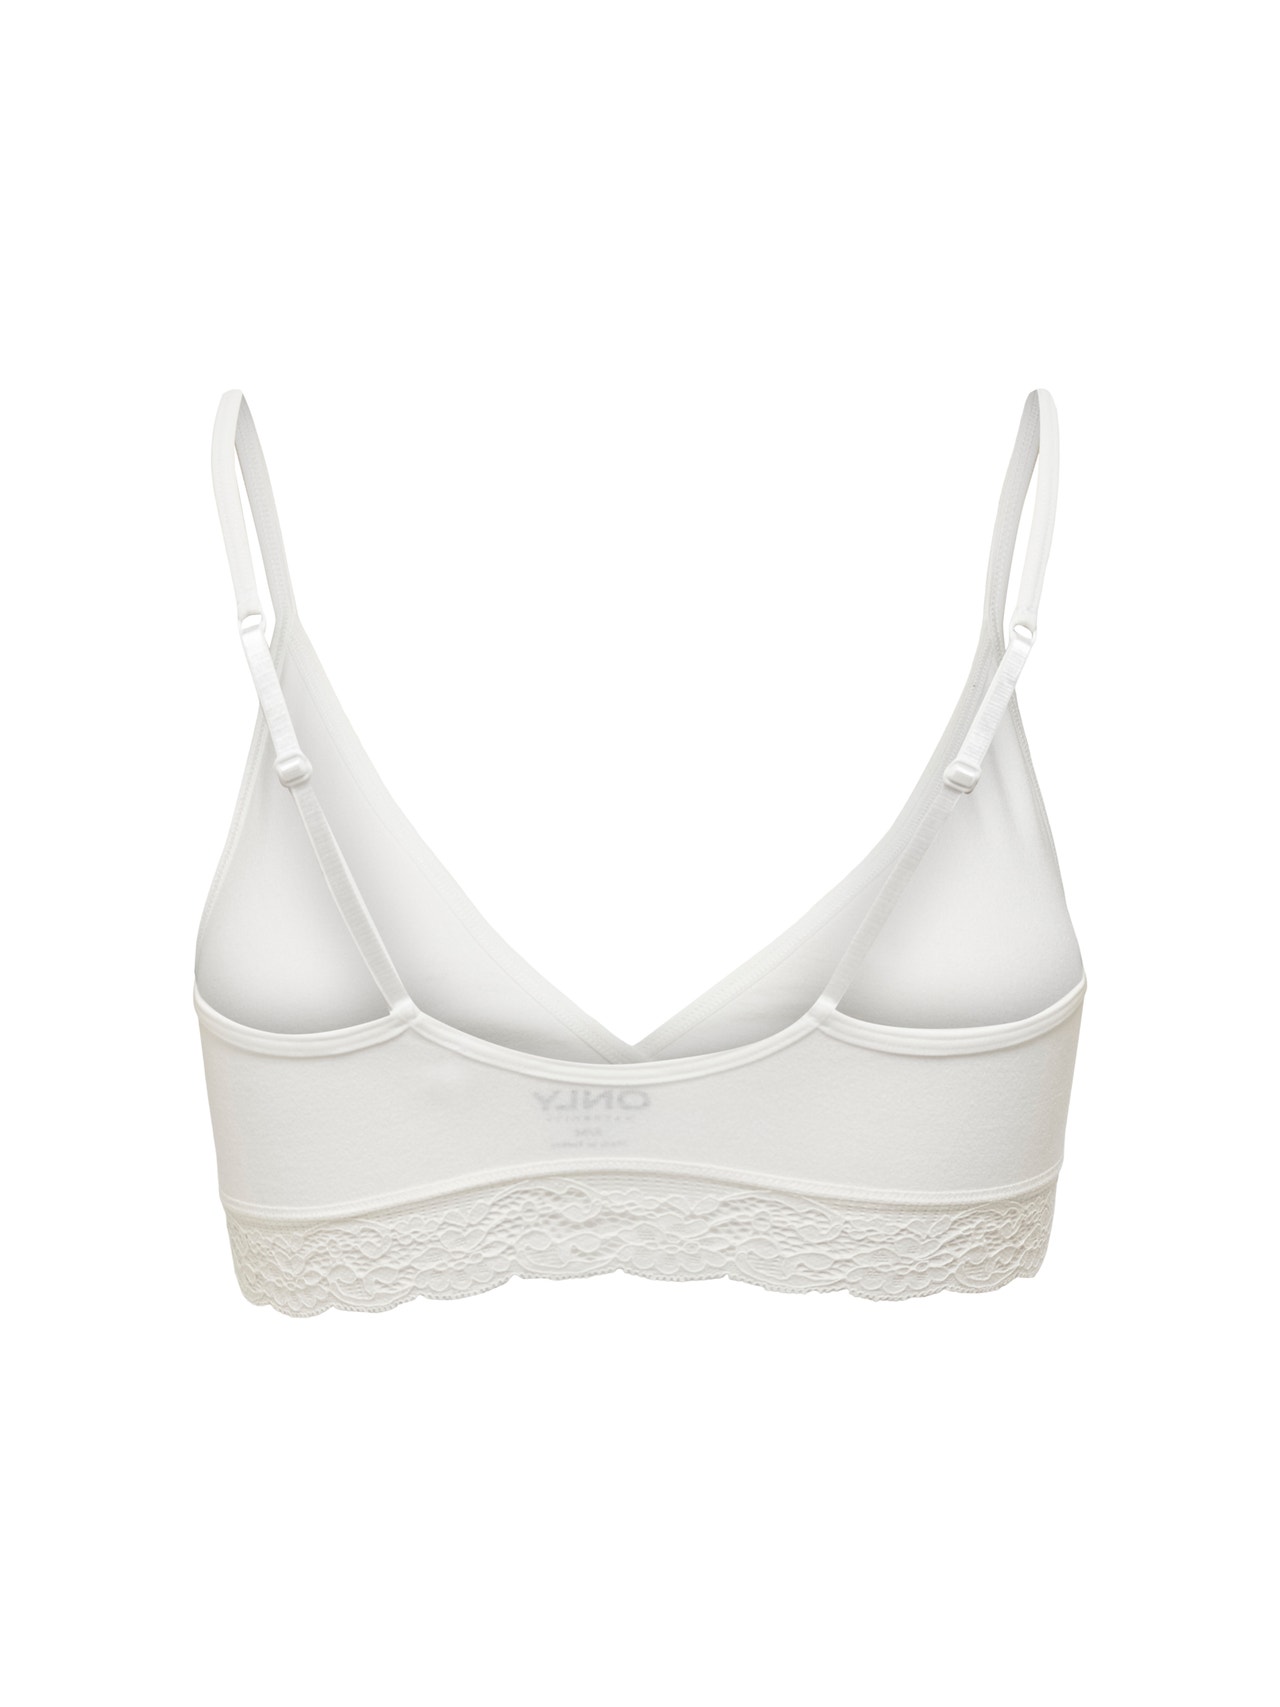 36D Nursing Bra White All over lace Ex-M&S Non-wired NON PADDED Marks  Spencr - Helia Beer Co